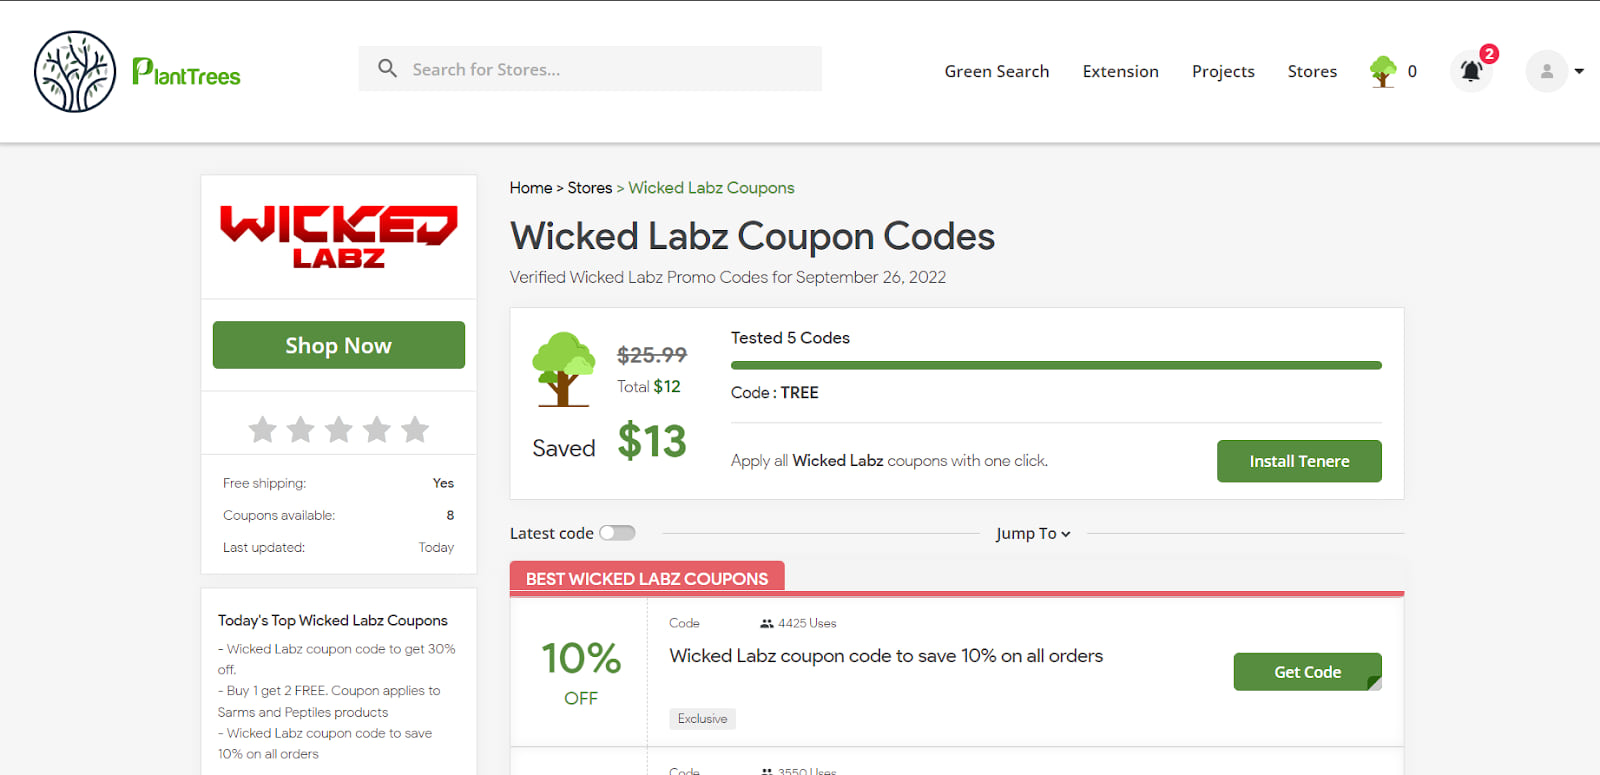 How to use Wicked Labz coupon 1